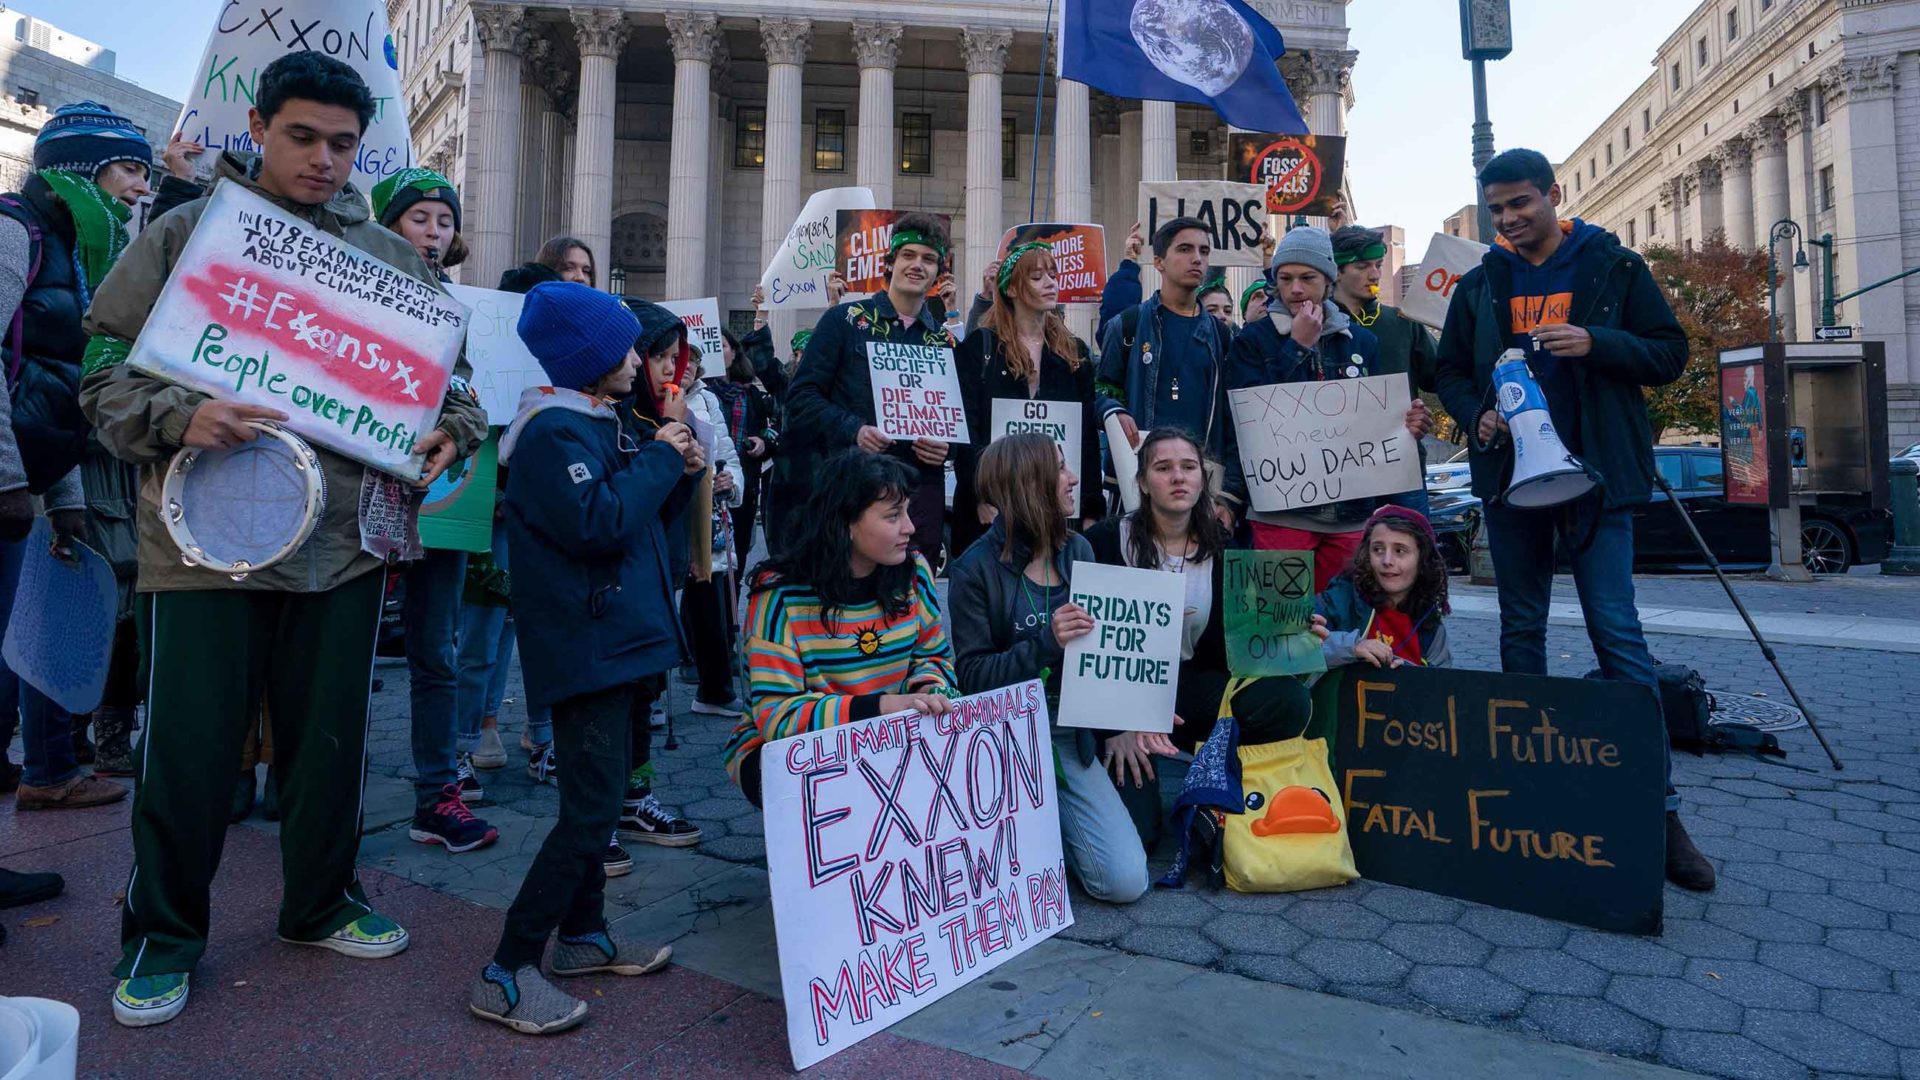 Climate protesters gather across the street from the New York County Courthouse, where a judge ruled in favor of Exxon Mobil this week.